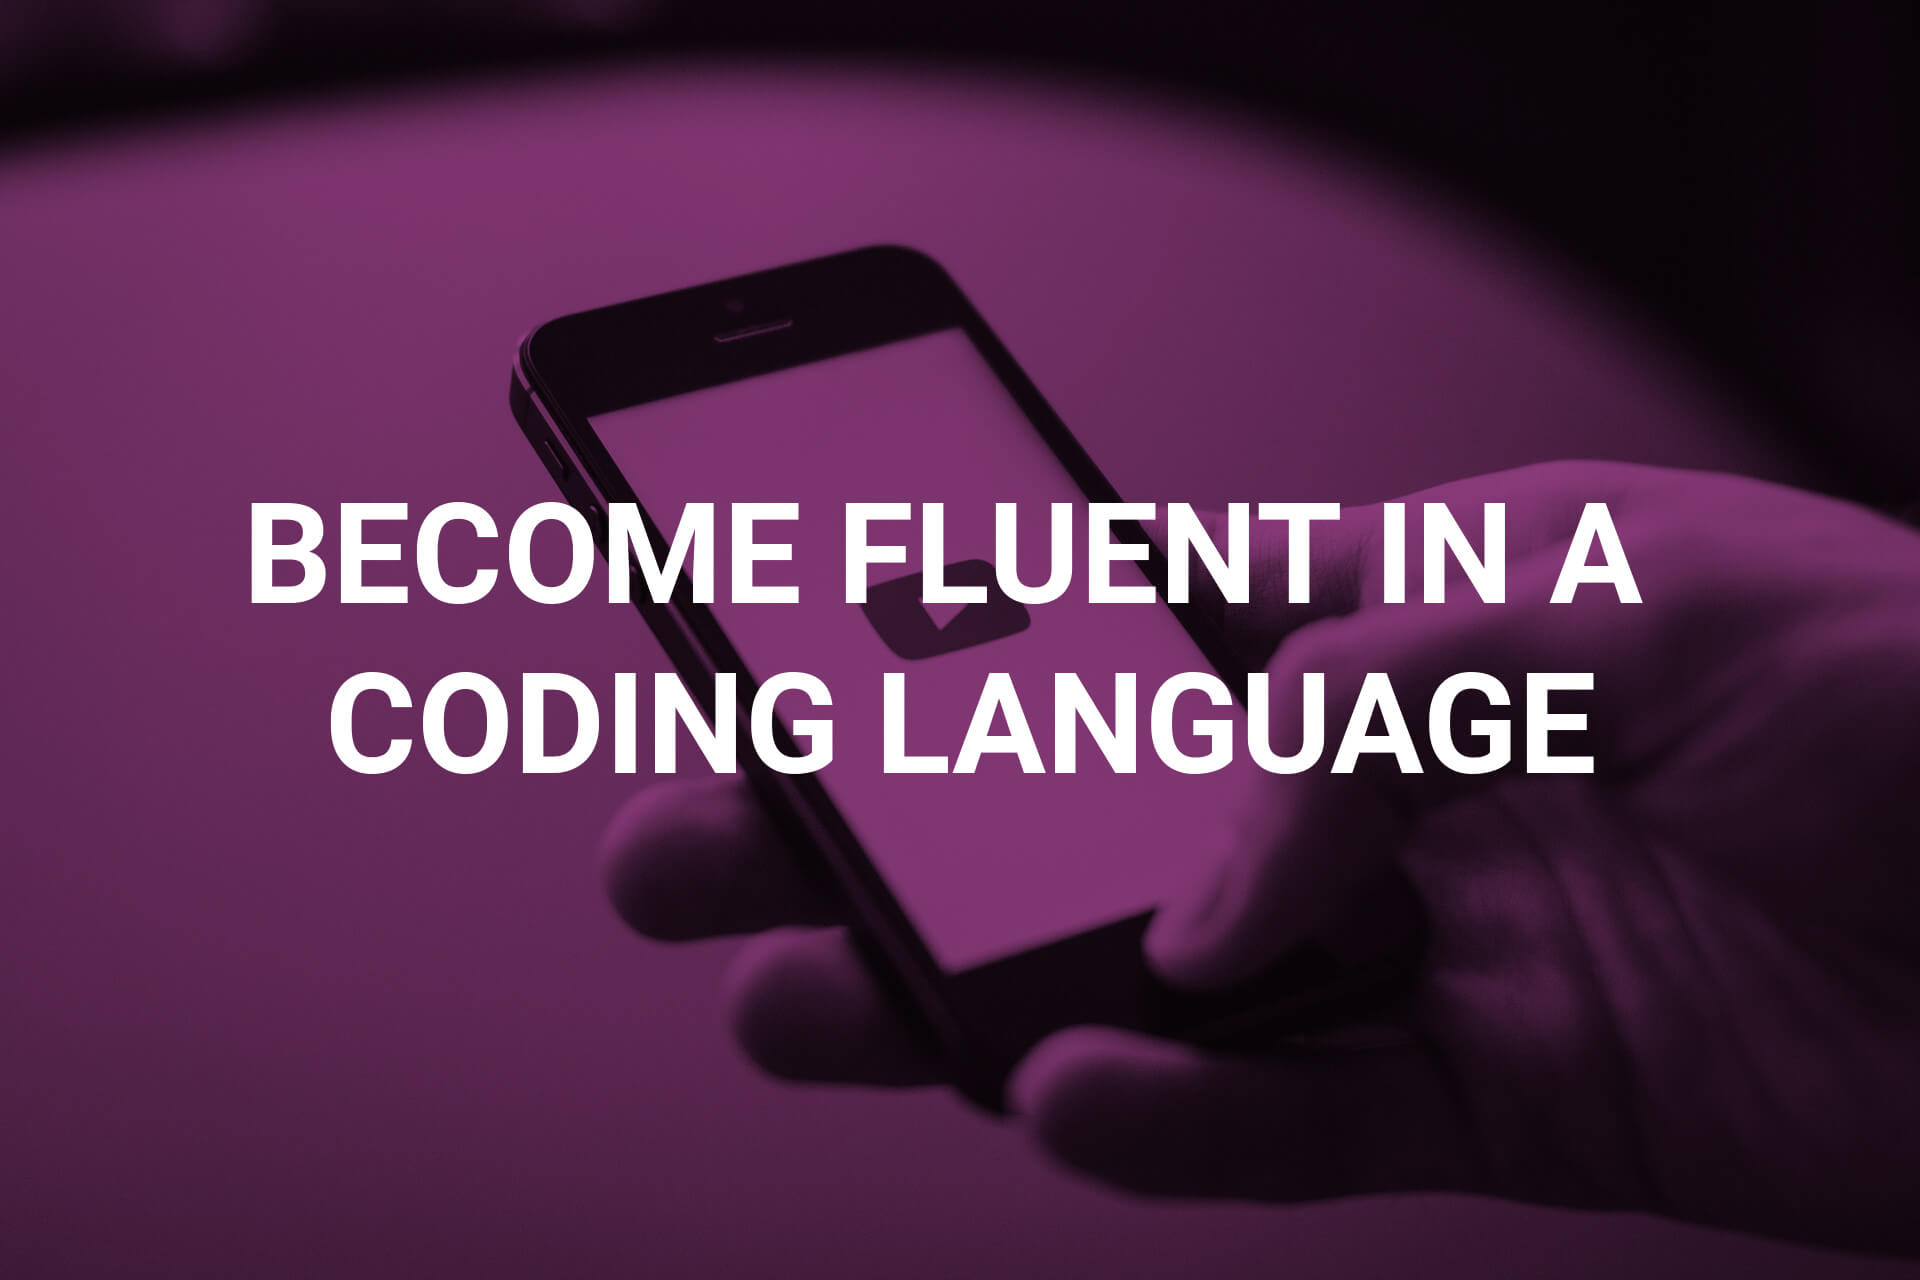 Digital Skills 8 - Become fluent in a coding language